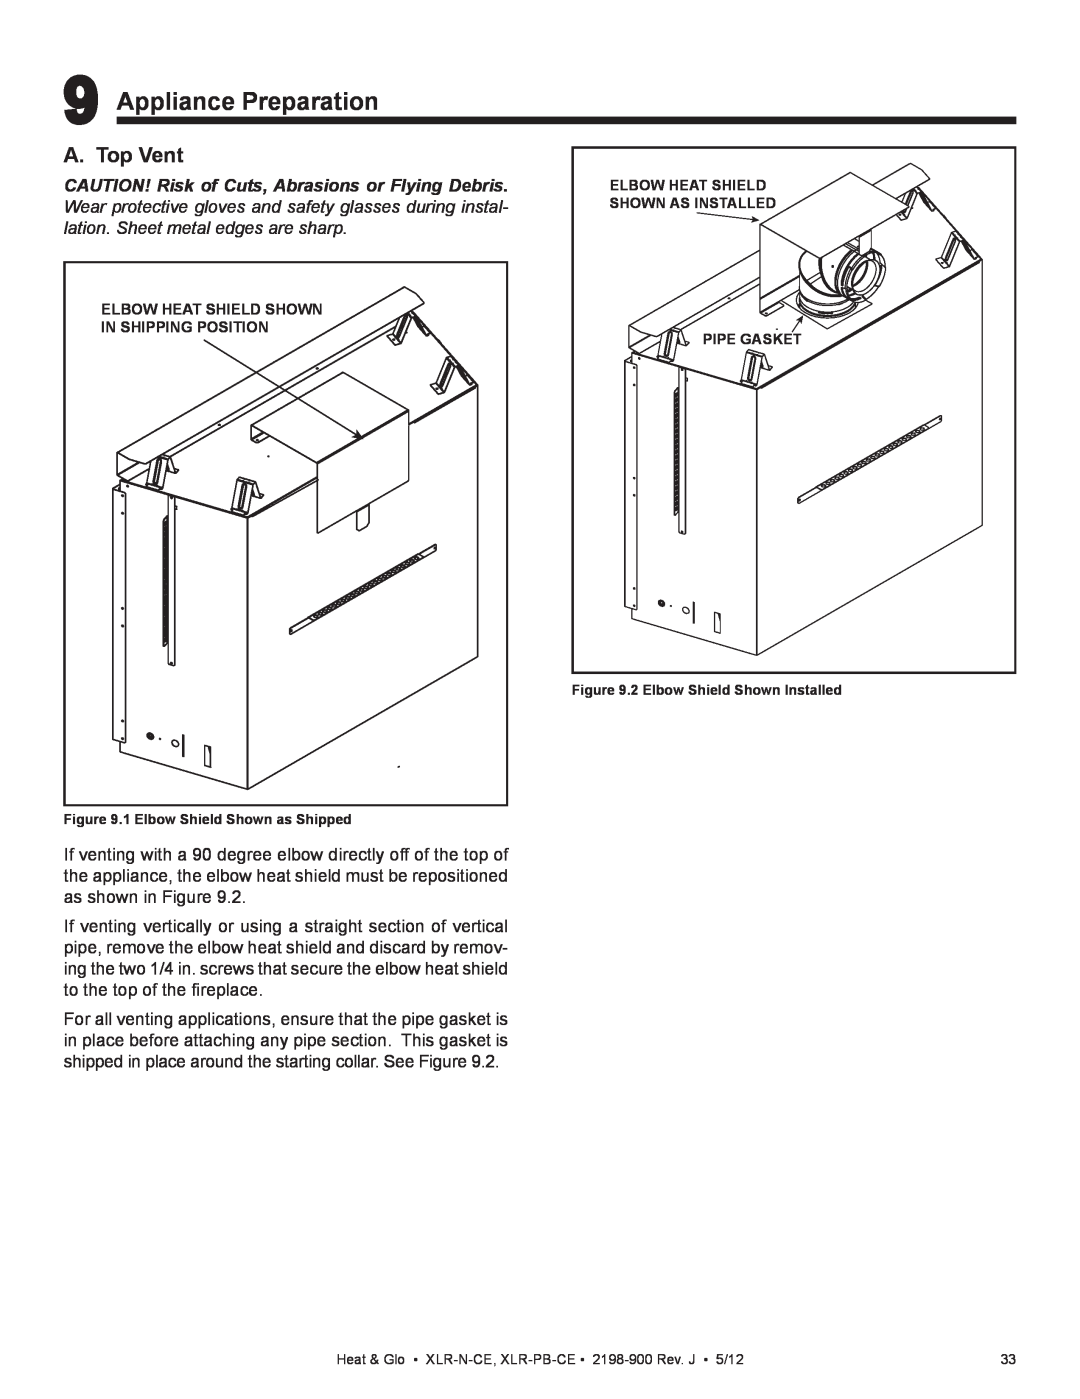 Heat & Glo LifeStyle XLR-PB-CE manual Appliance Preparation, A. Top Vent, CAUTION! Risk of Cuts, Abrasions or Flying Debris 